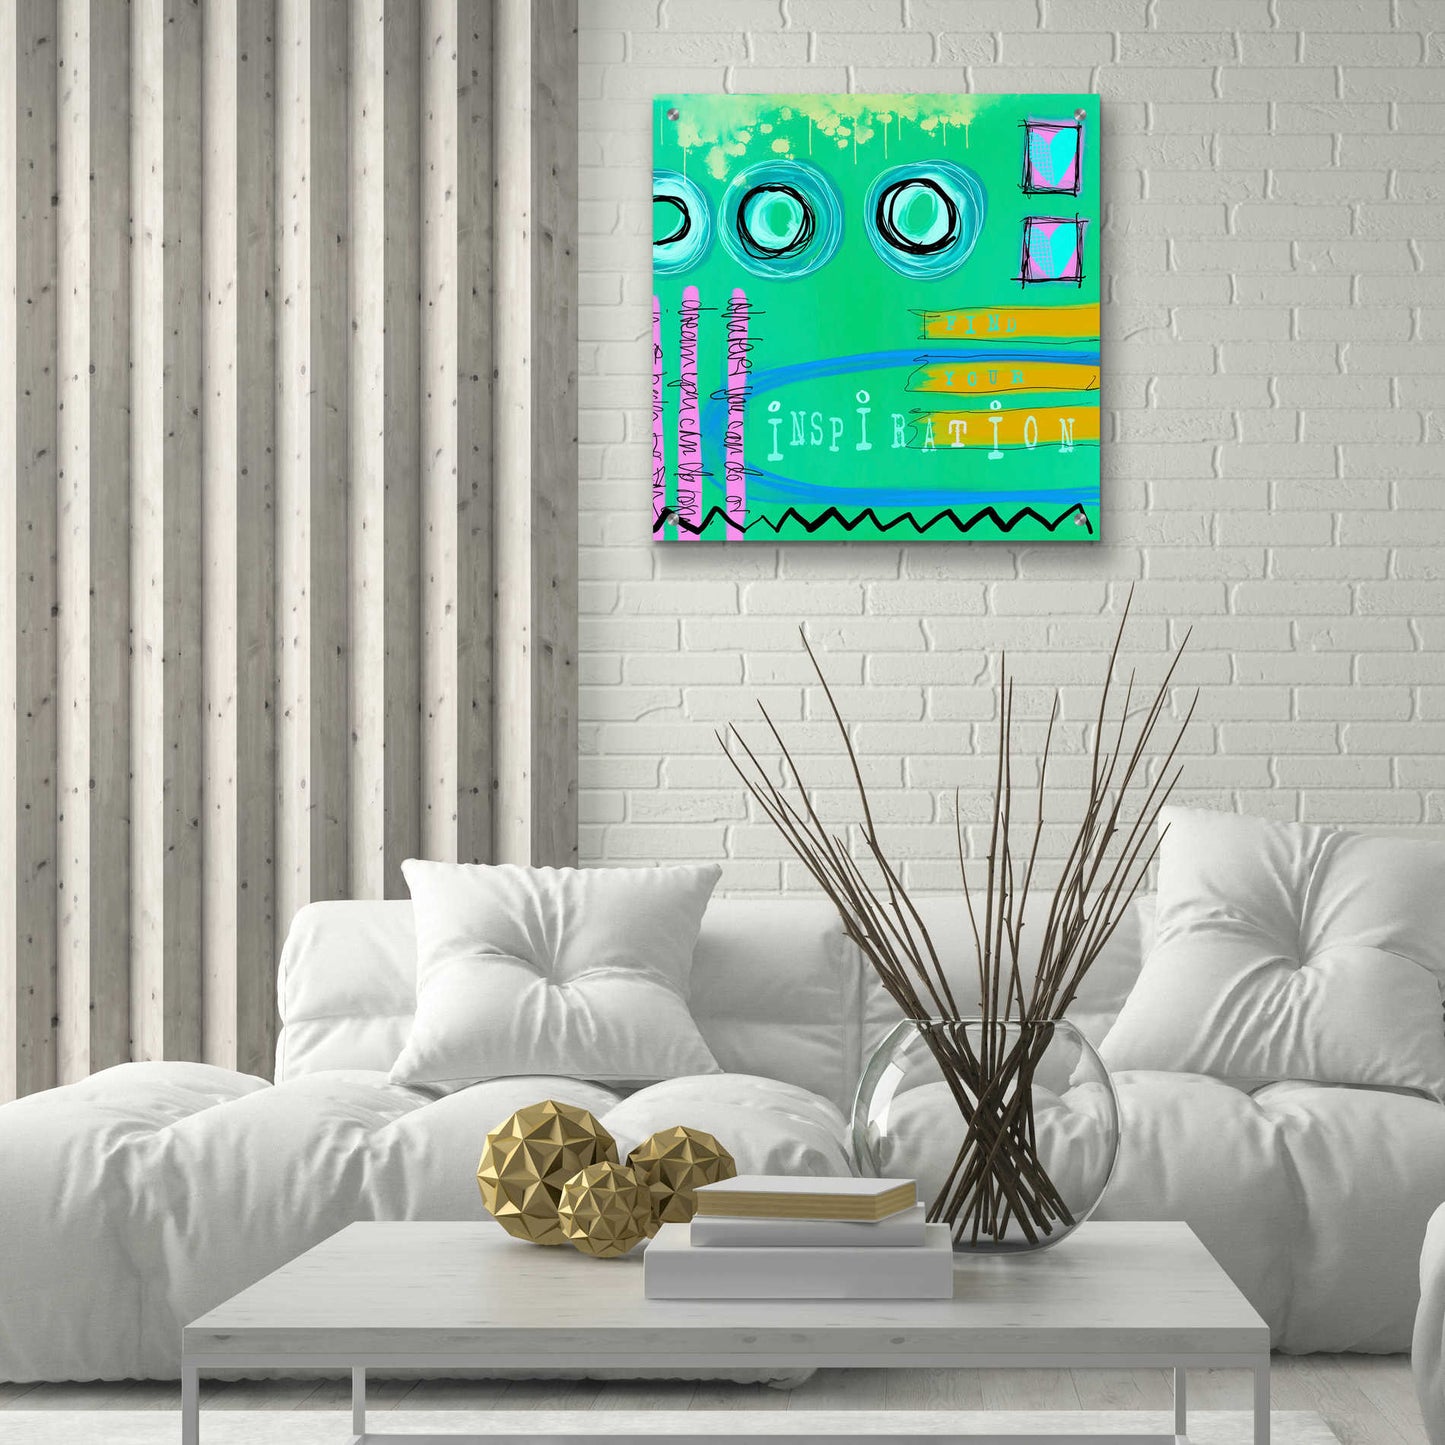 Epic Art 'Abstract Inspiration' by Andrea Haase Acrylic Glass Wall Art,24x24